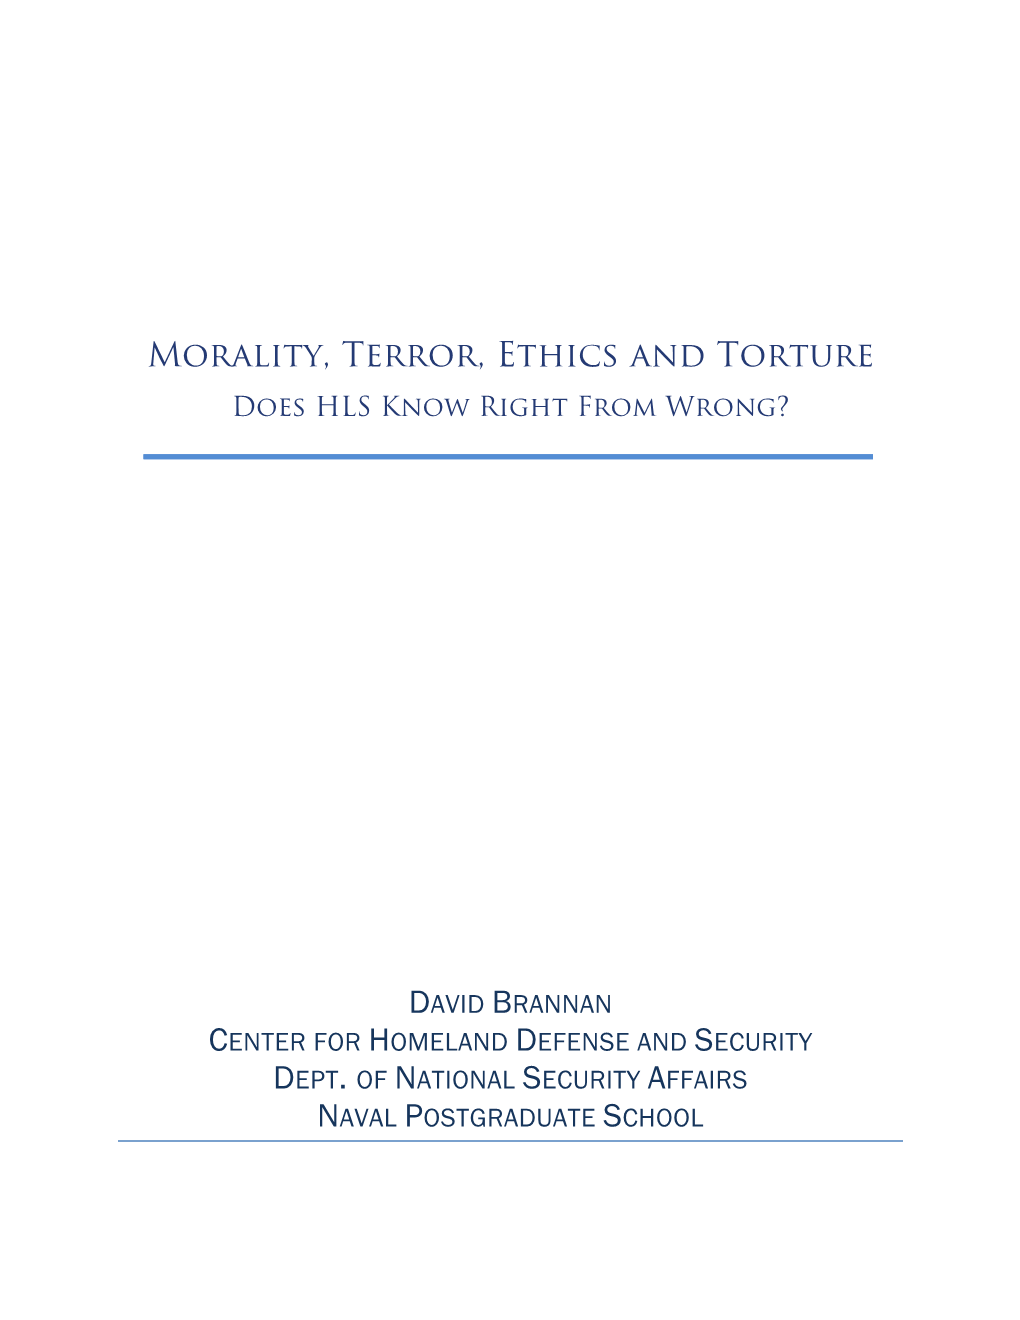 Morality, Terror, Ethics and Torture Does HLS Know Right from Wrong?